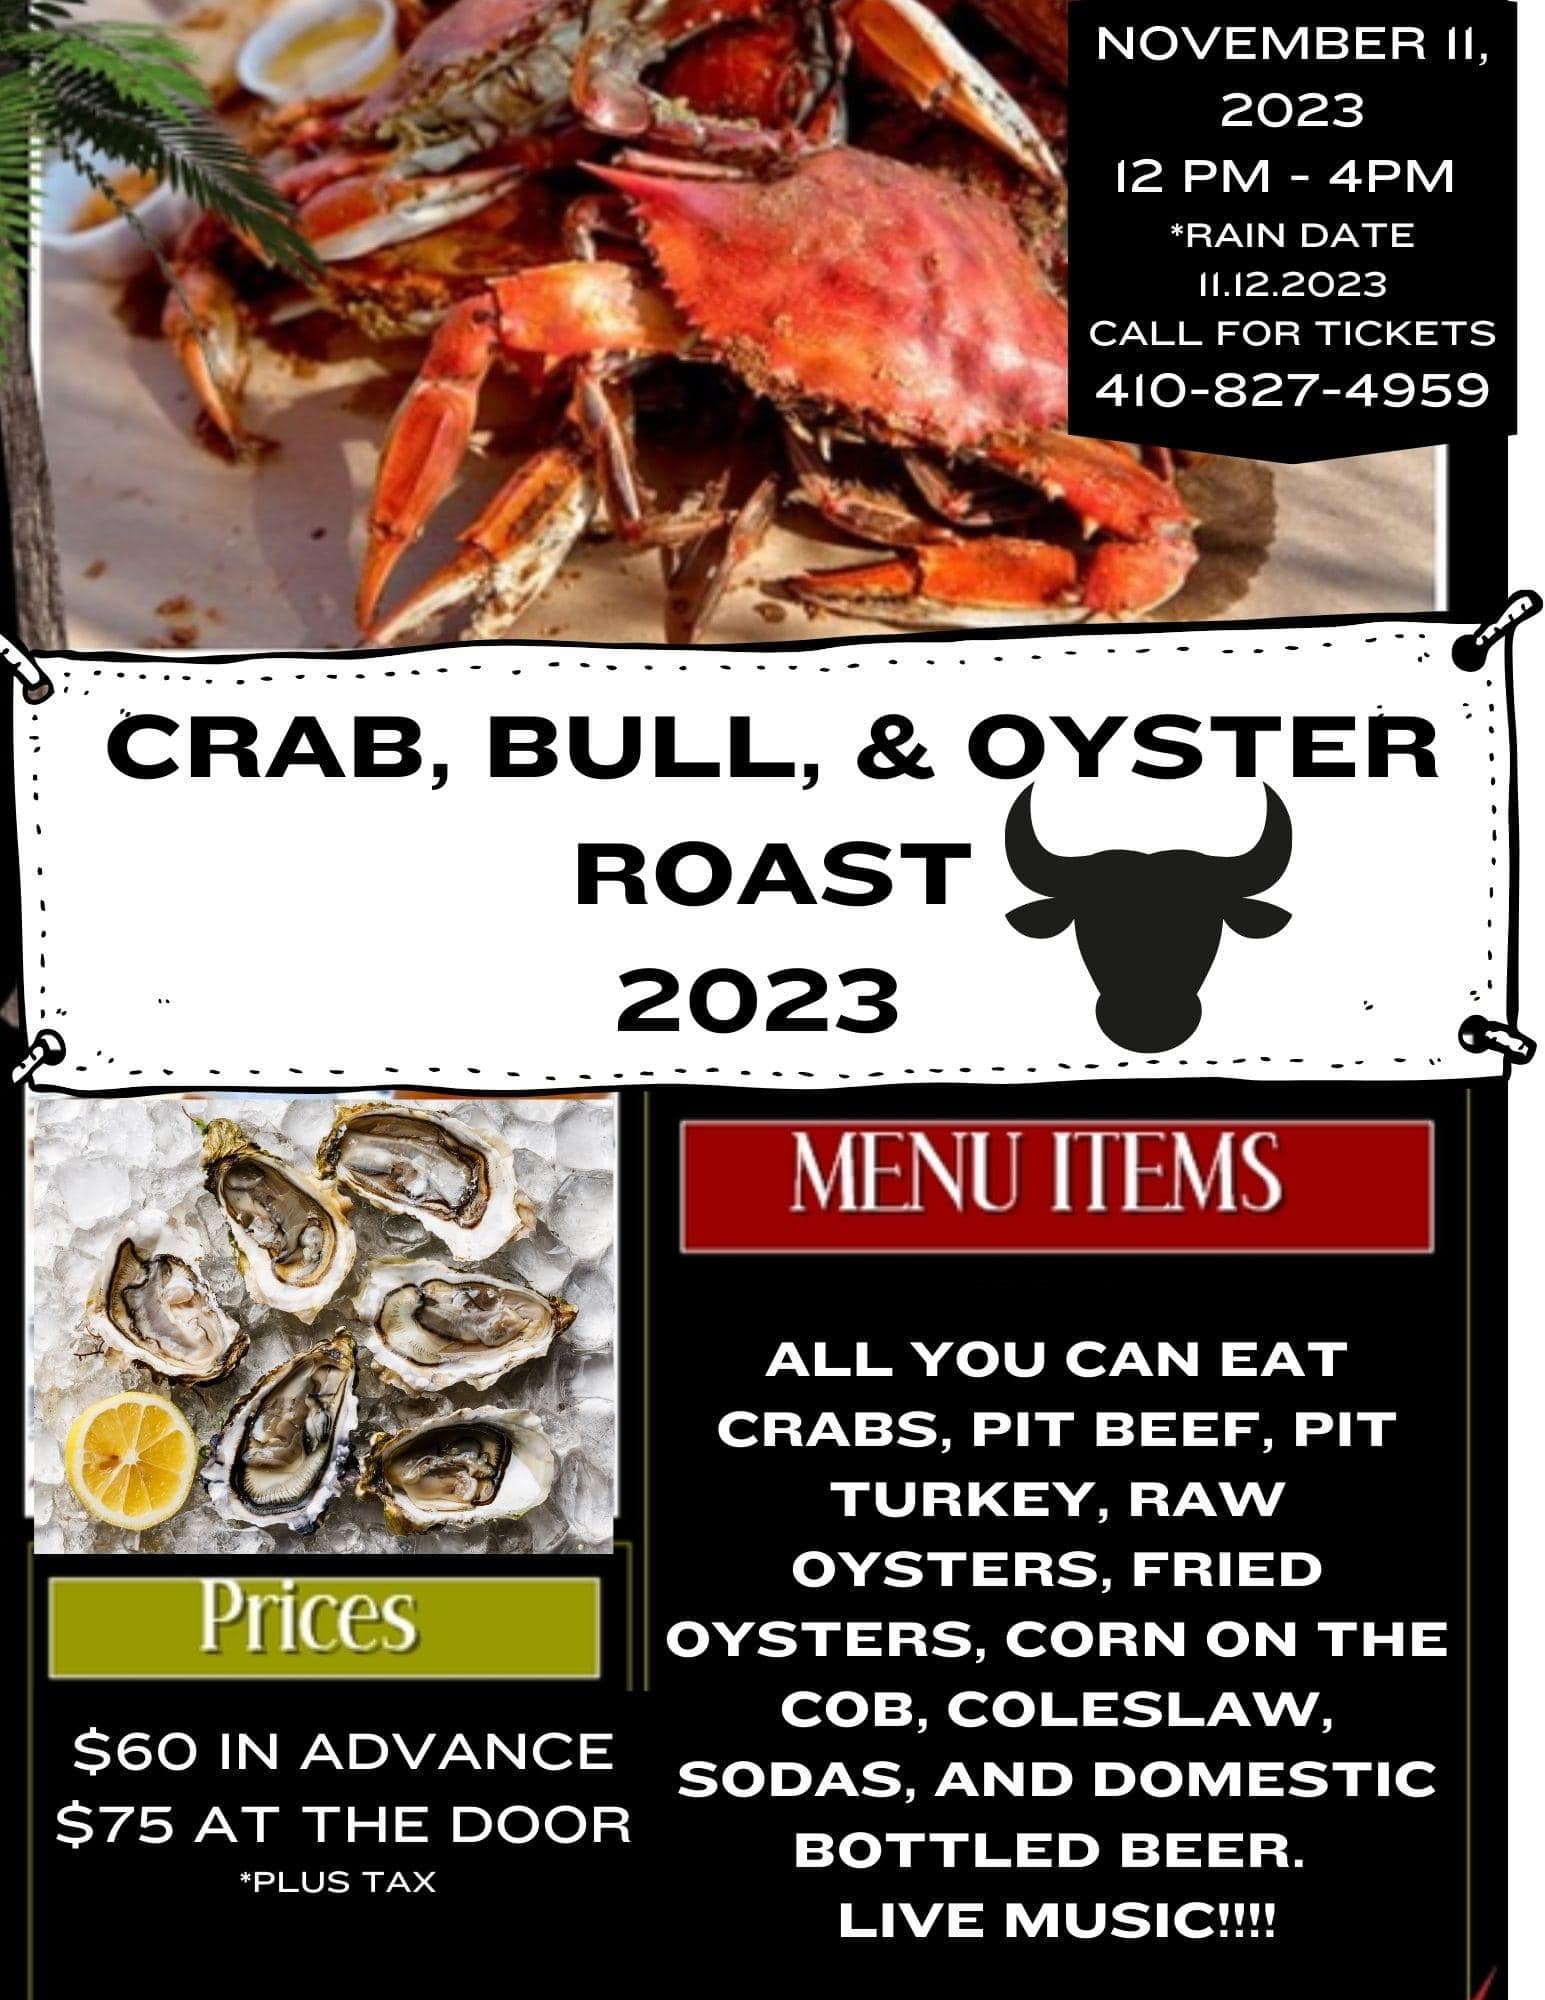 Crab Bull and Oyster roast 2023